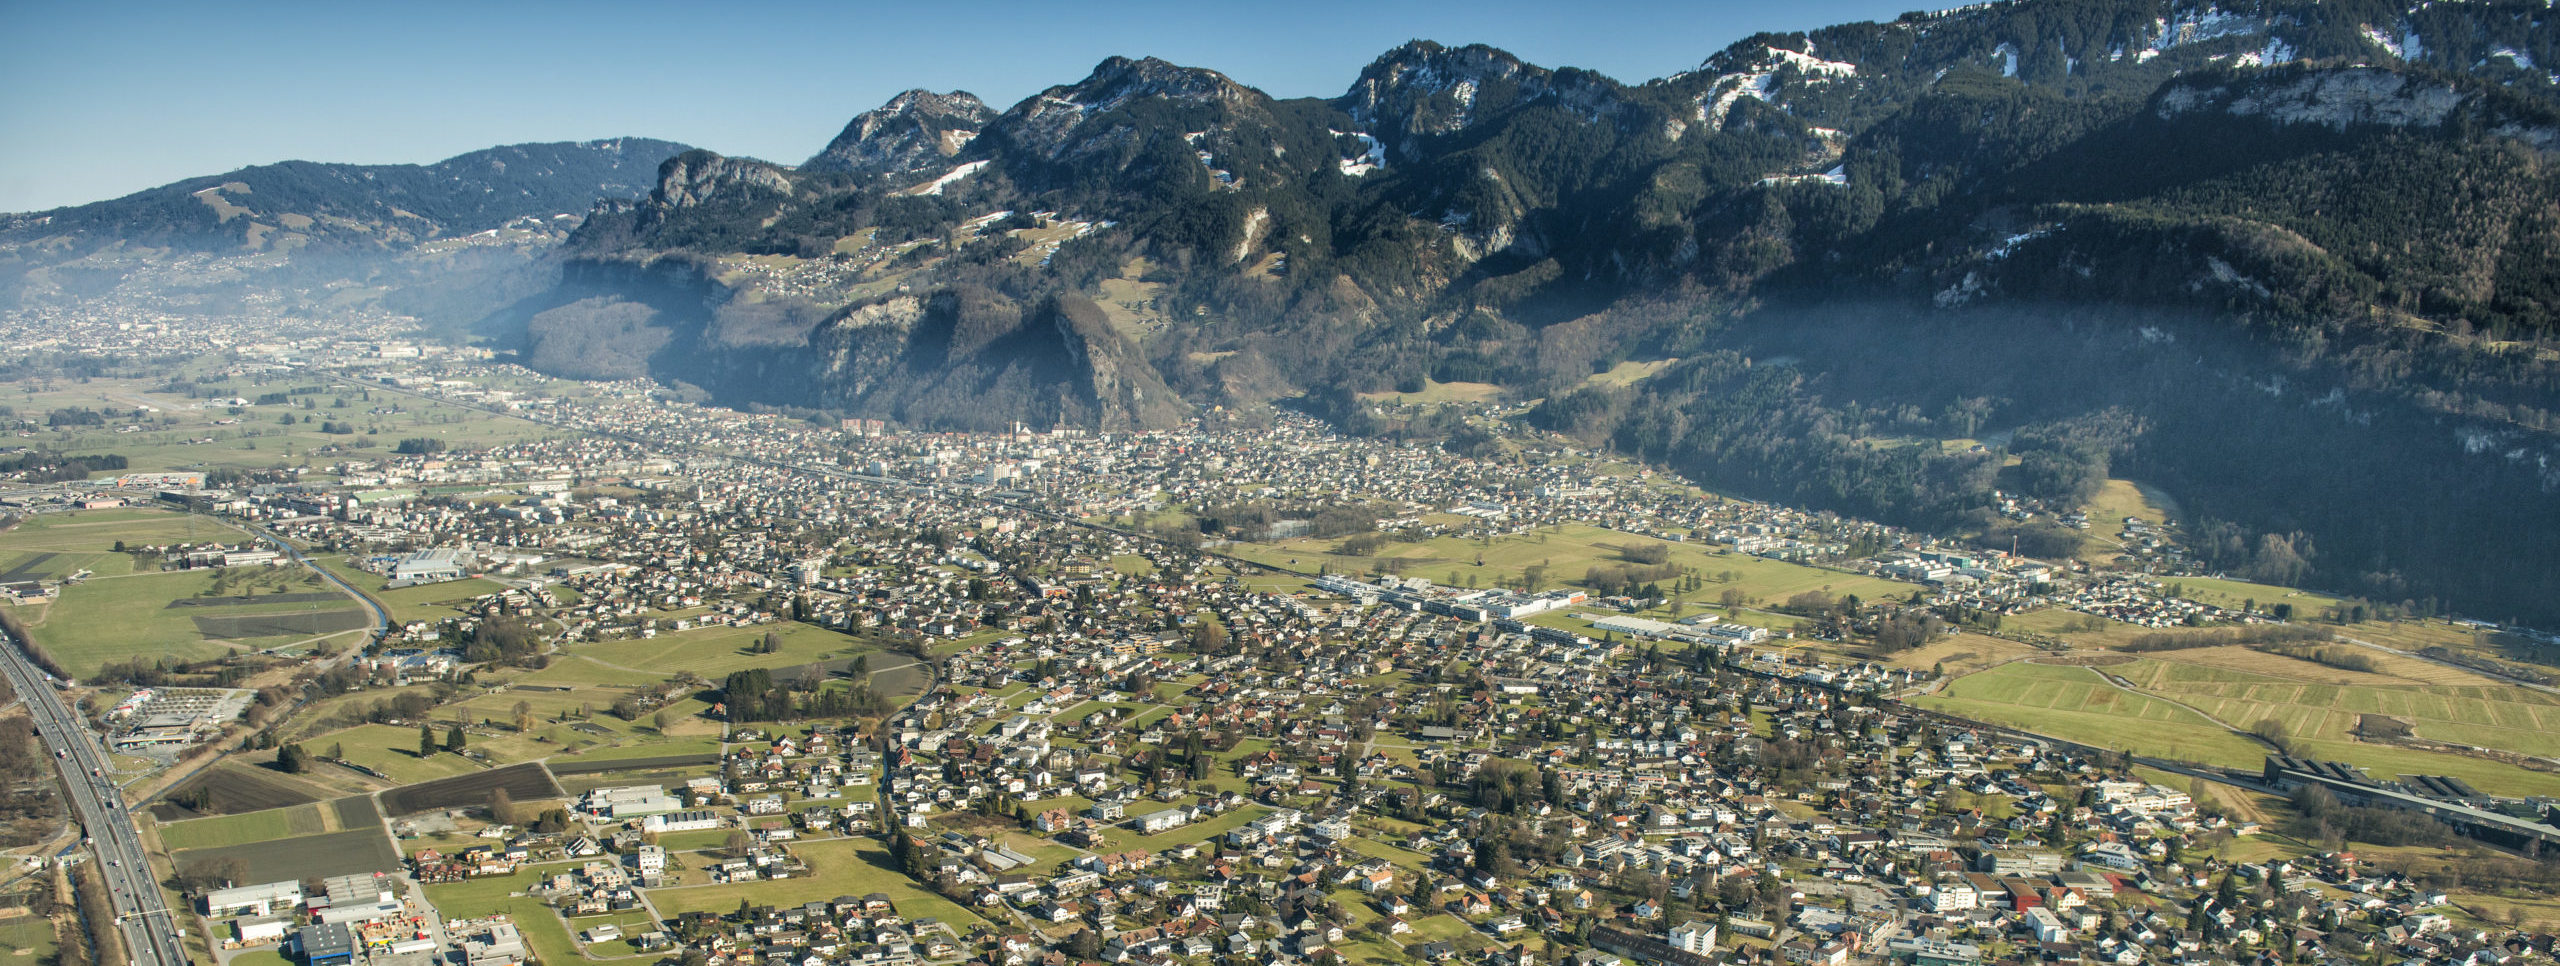 Aerial Photography From The Rhine Valley In Austria